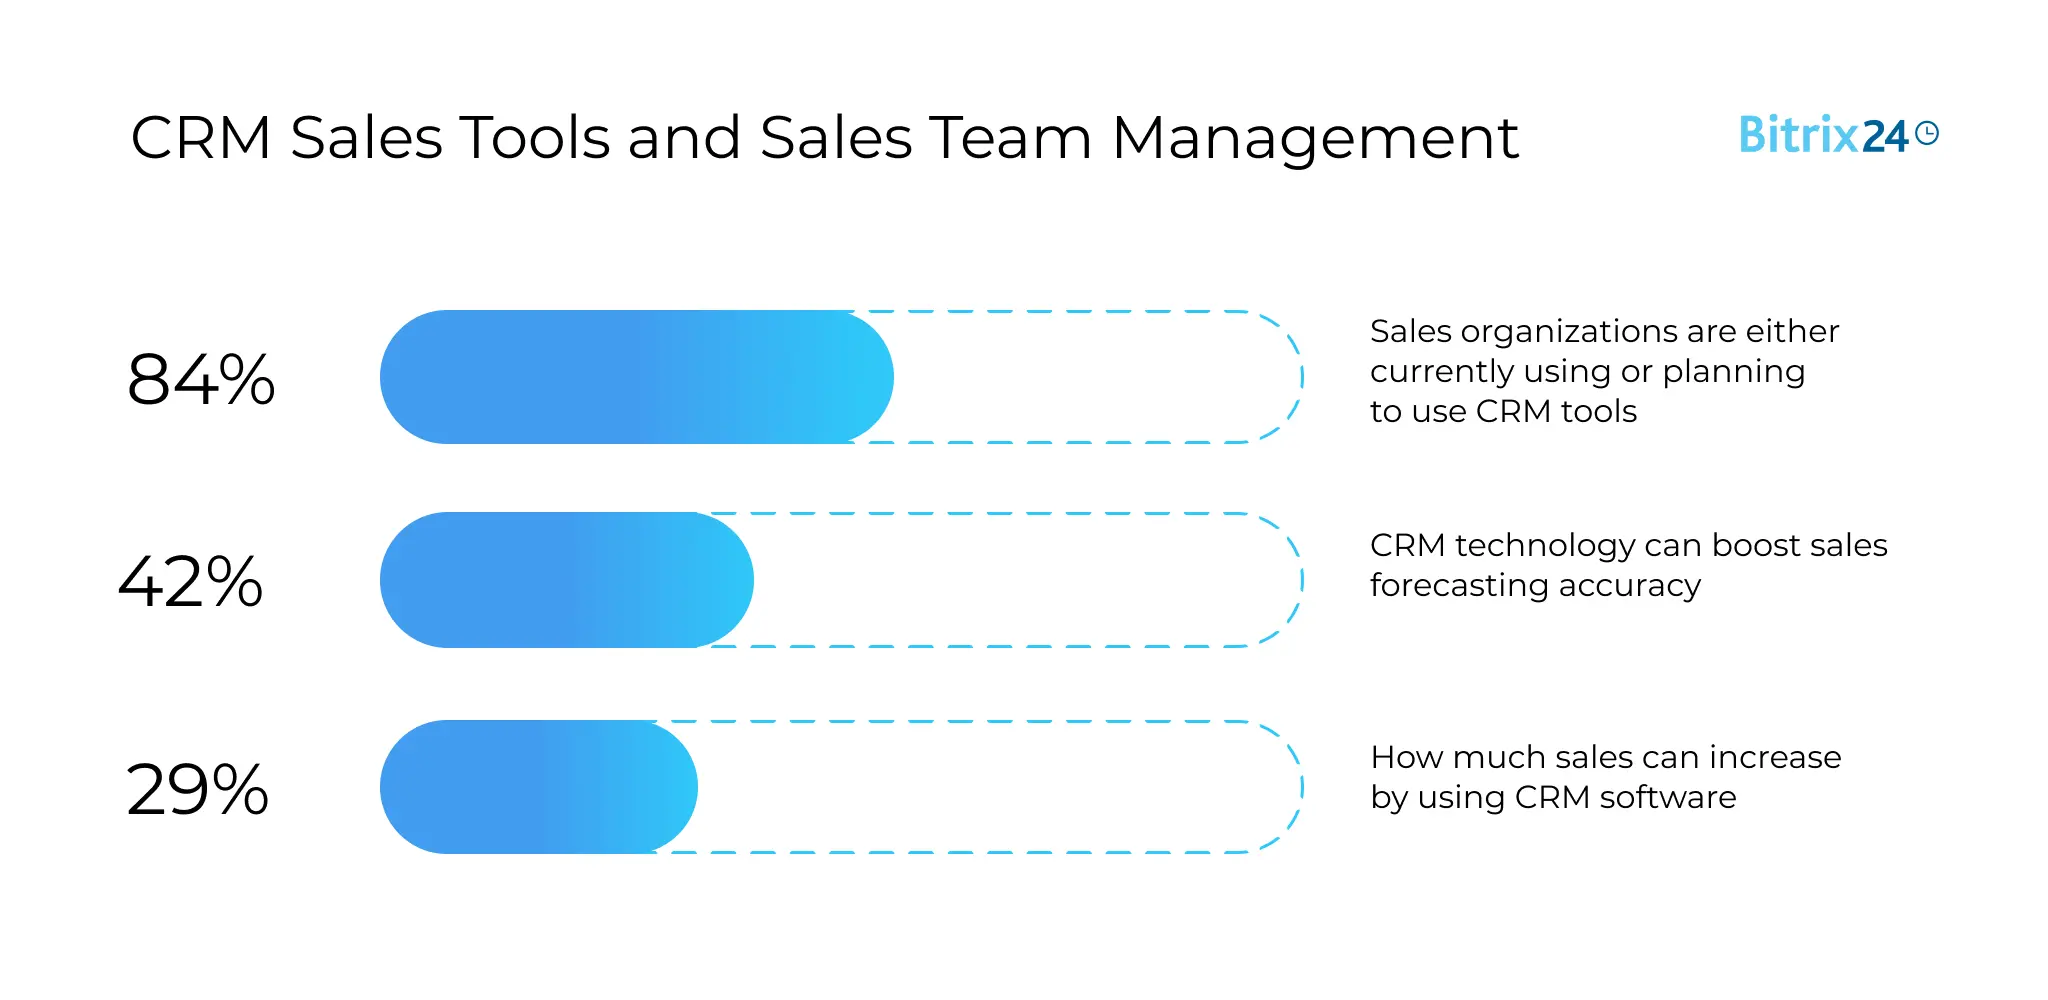  CRM Sales Tools and Sales Team Management